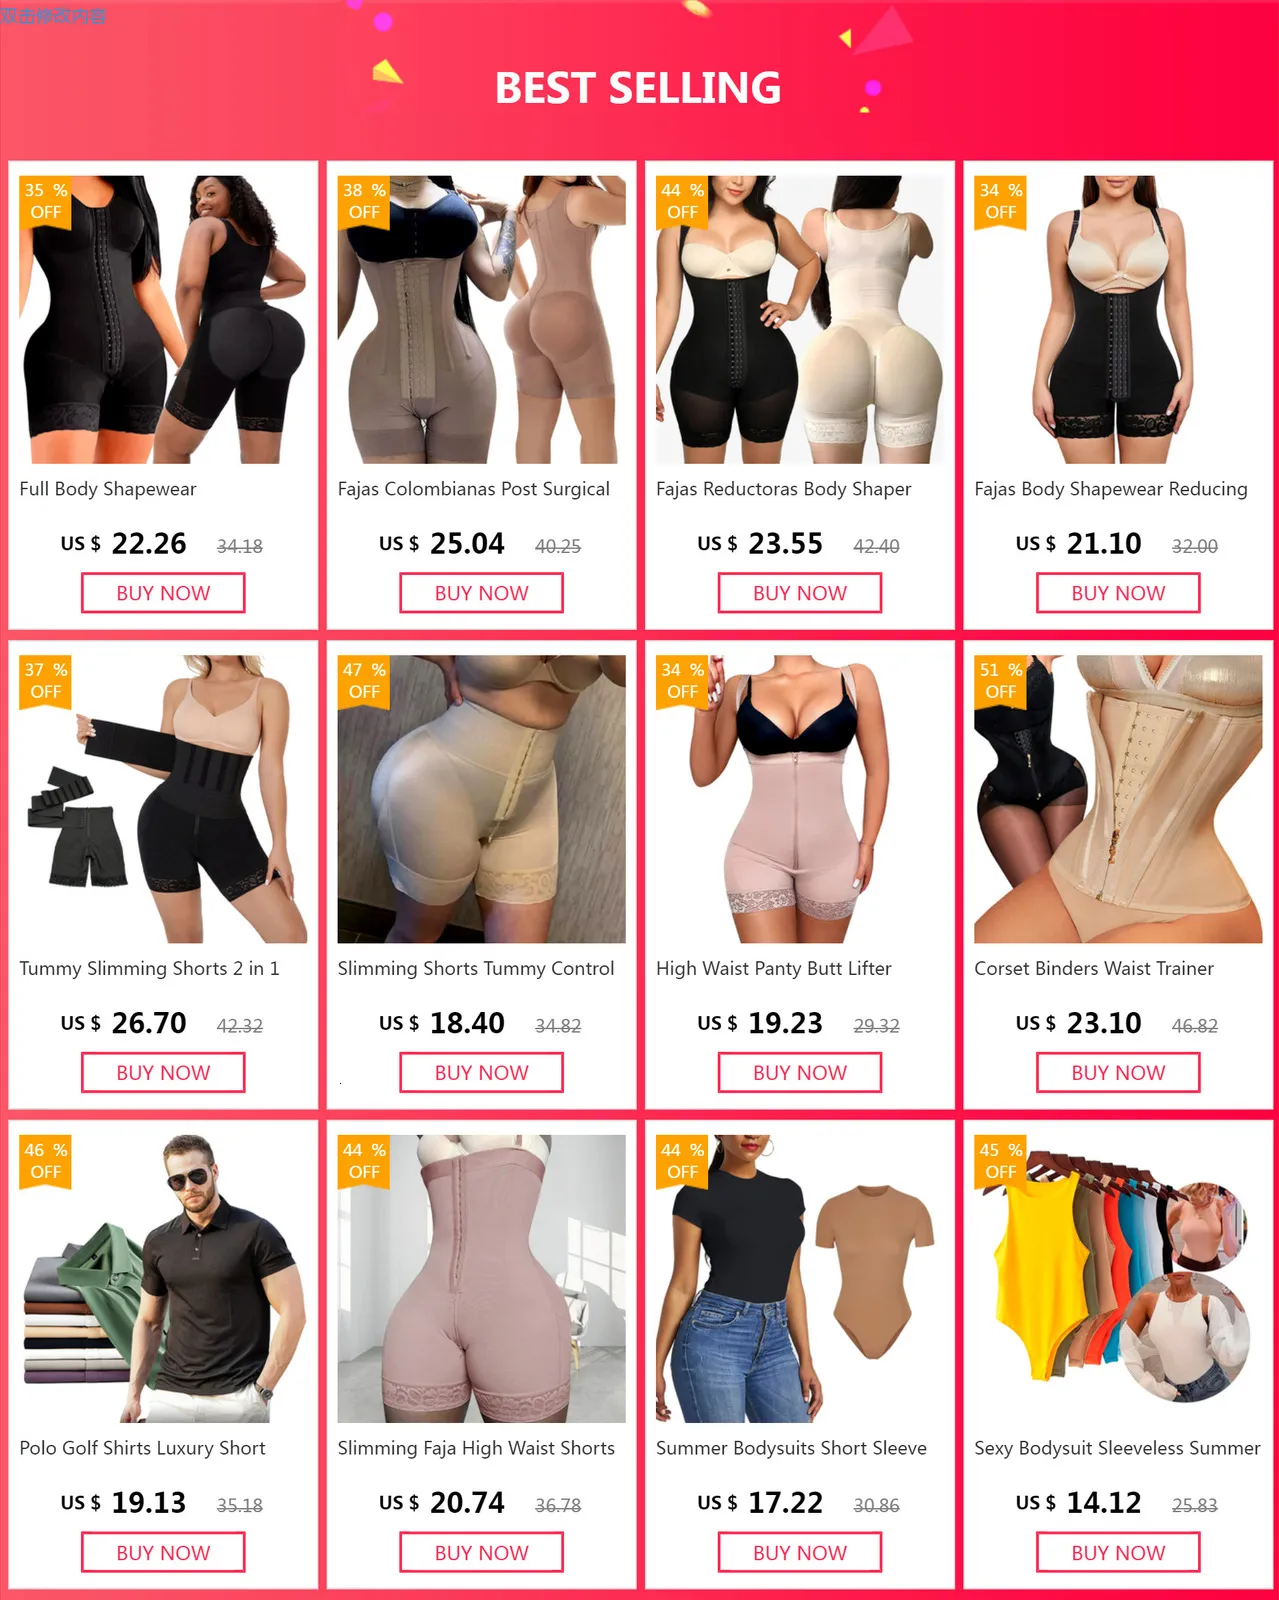 Taille Ventre Shaper Rembourré Culotte Silicone Butt Lifter Hip Enhancer  Push Up Short Shaper String Invisible Brief Faux Ass Body Shaperwear